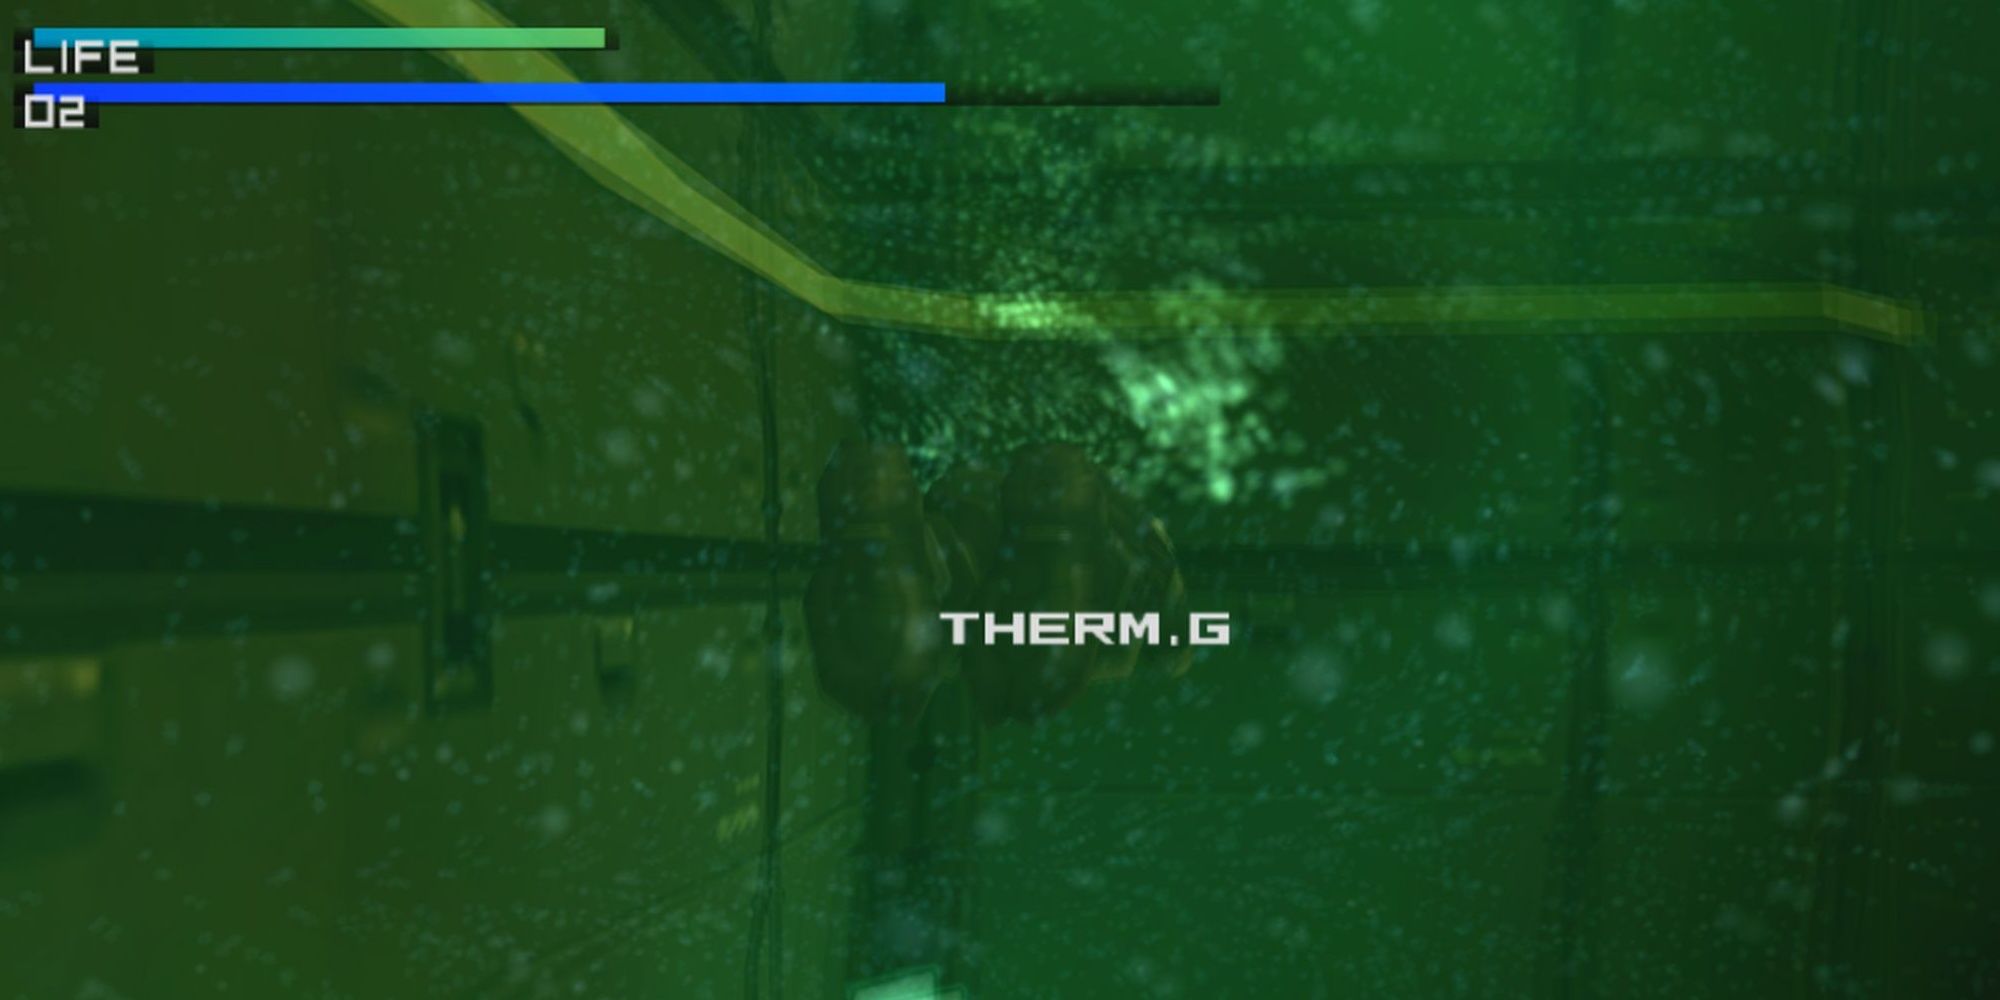 The secret thermal goggles in the pool at the start of Metal Gear Solid 2.